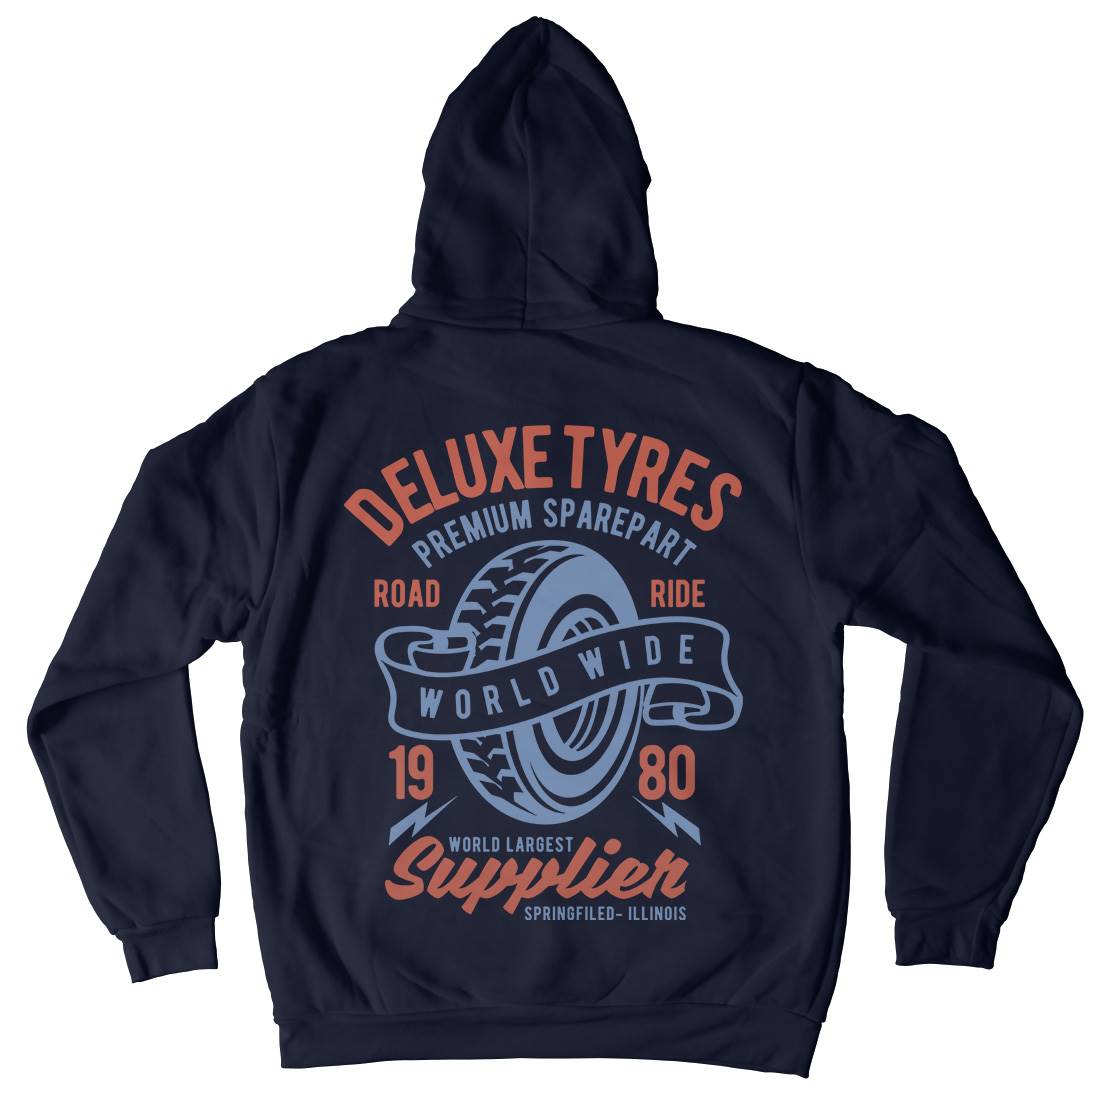 Deluxe Tyres Mens Hoodie With Pocket Cars B204